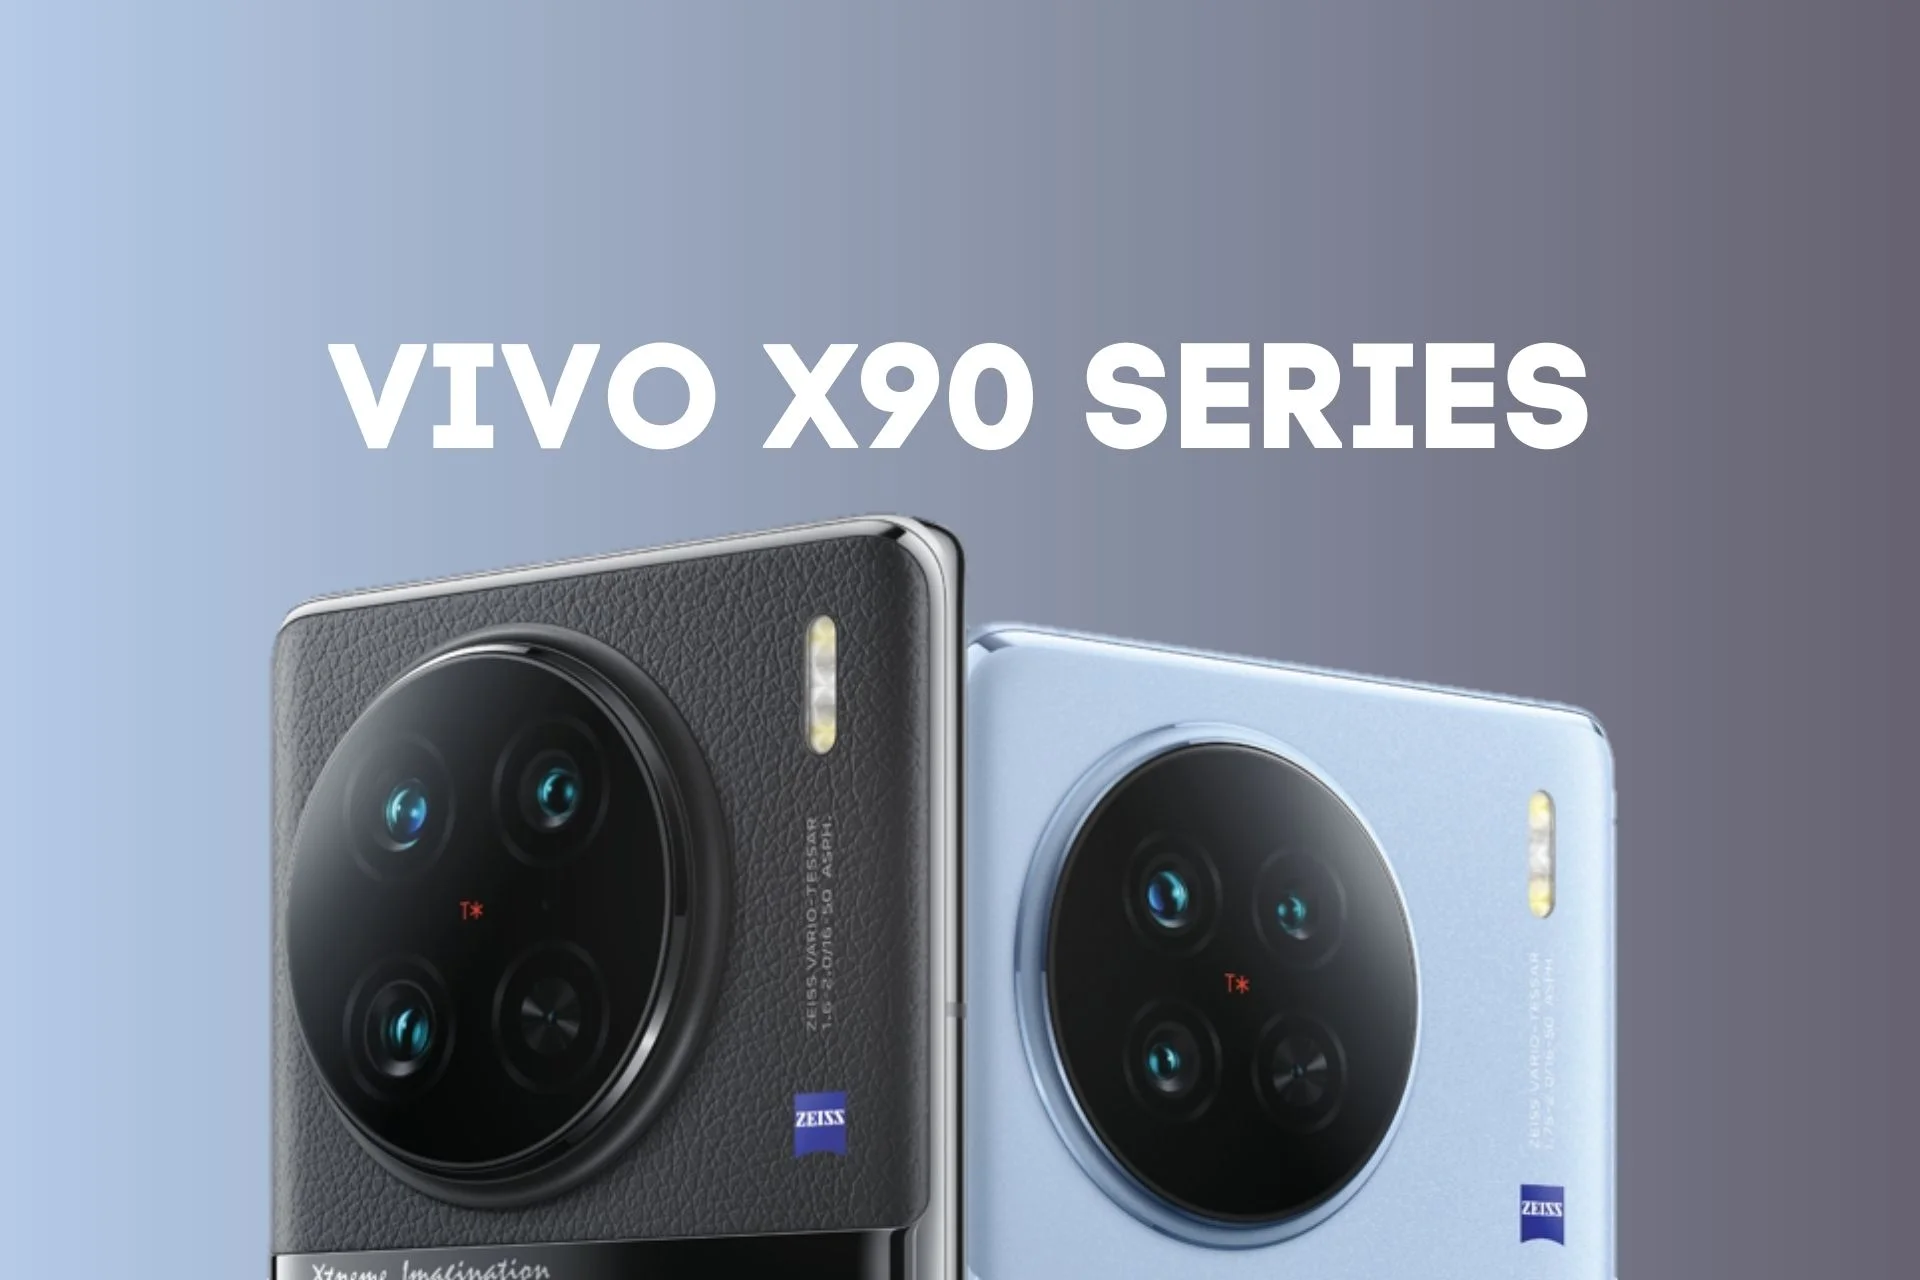 You are currently viewing Vivo X90 and Vivo X90 Pro: Specs, Fetures, And Availability | Launching On April 26